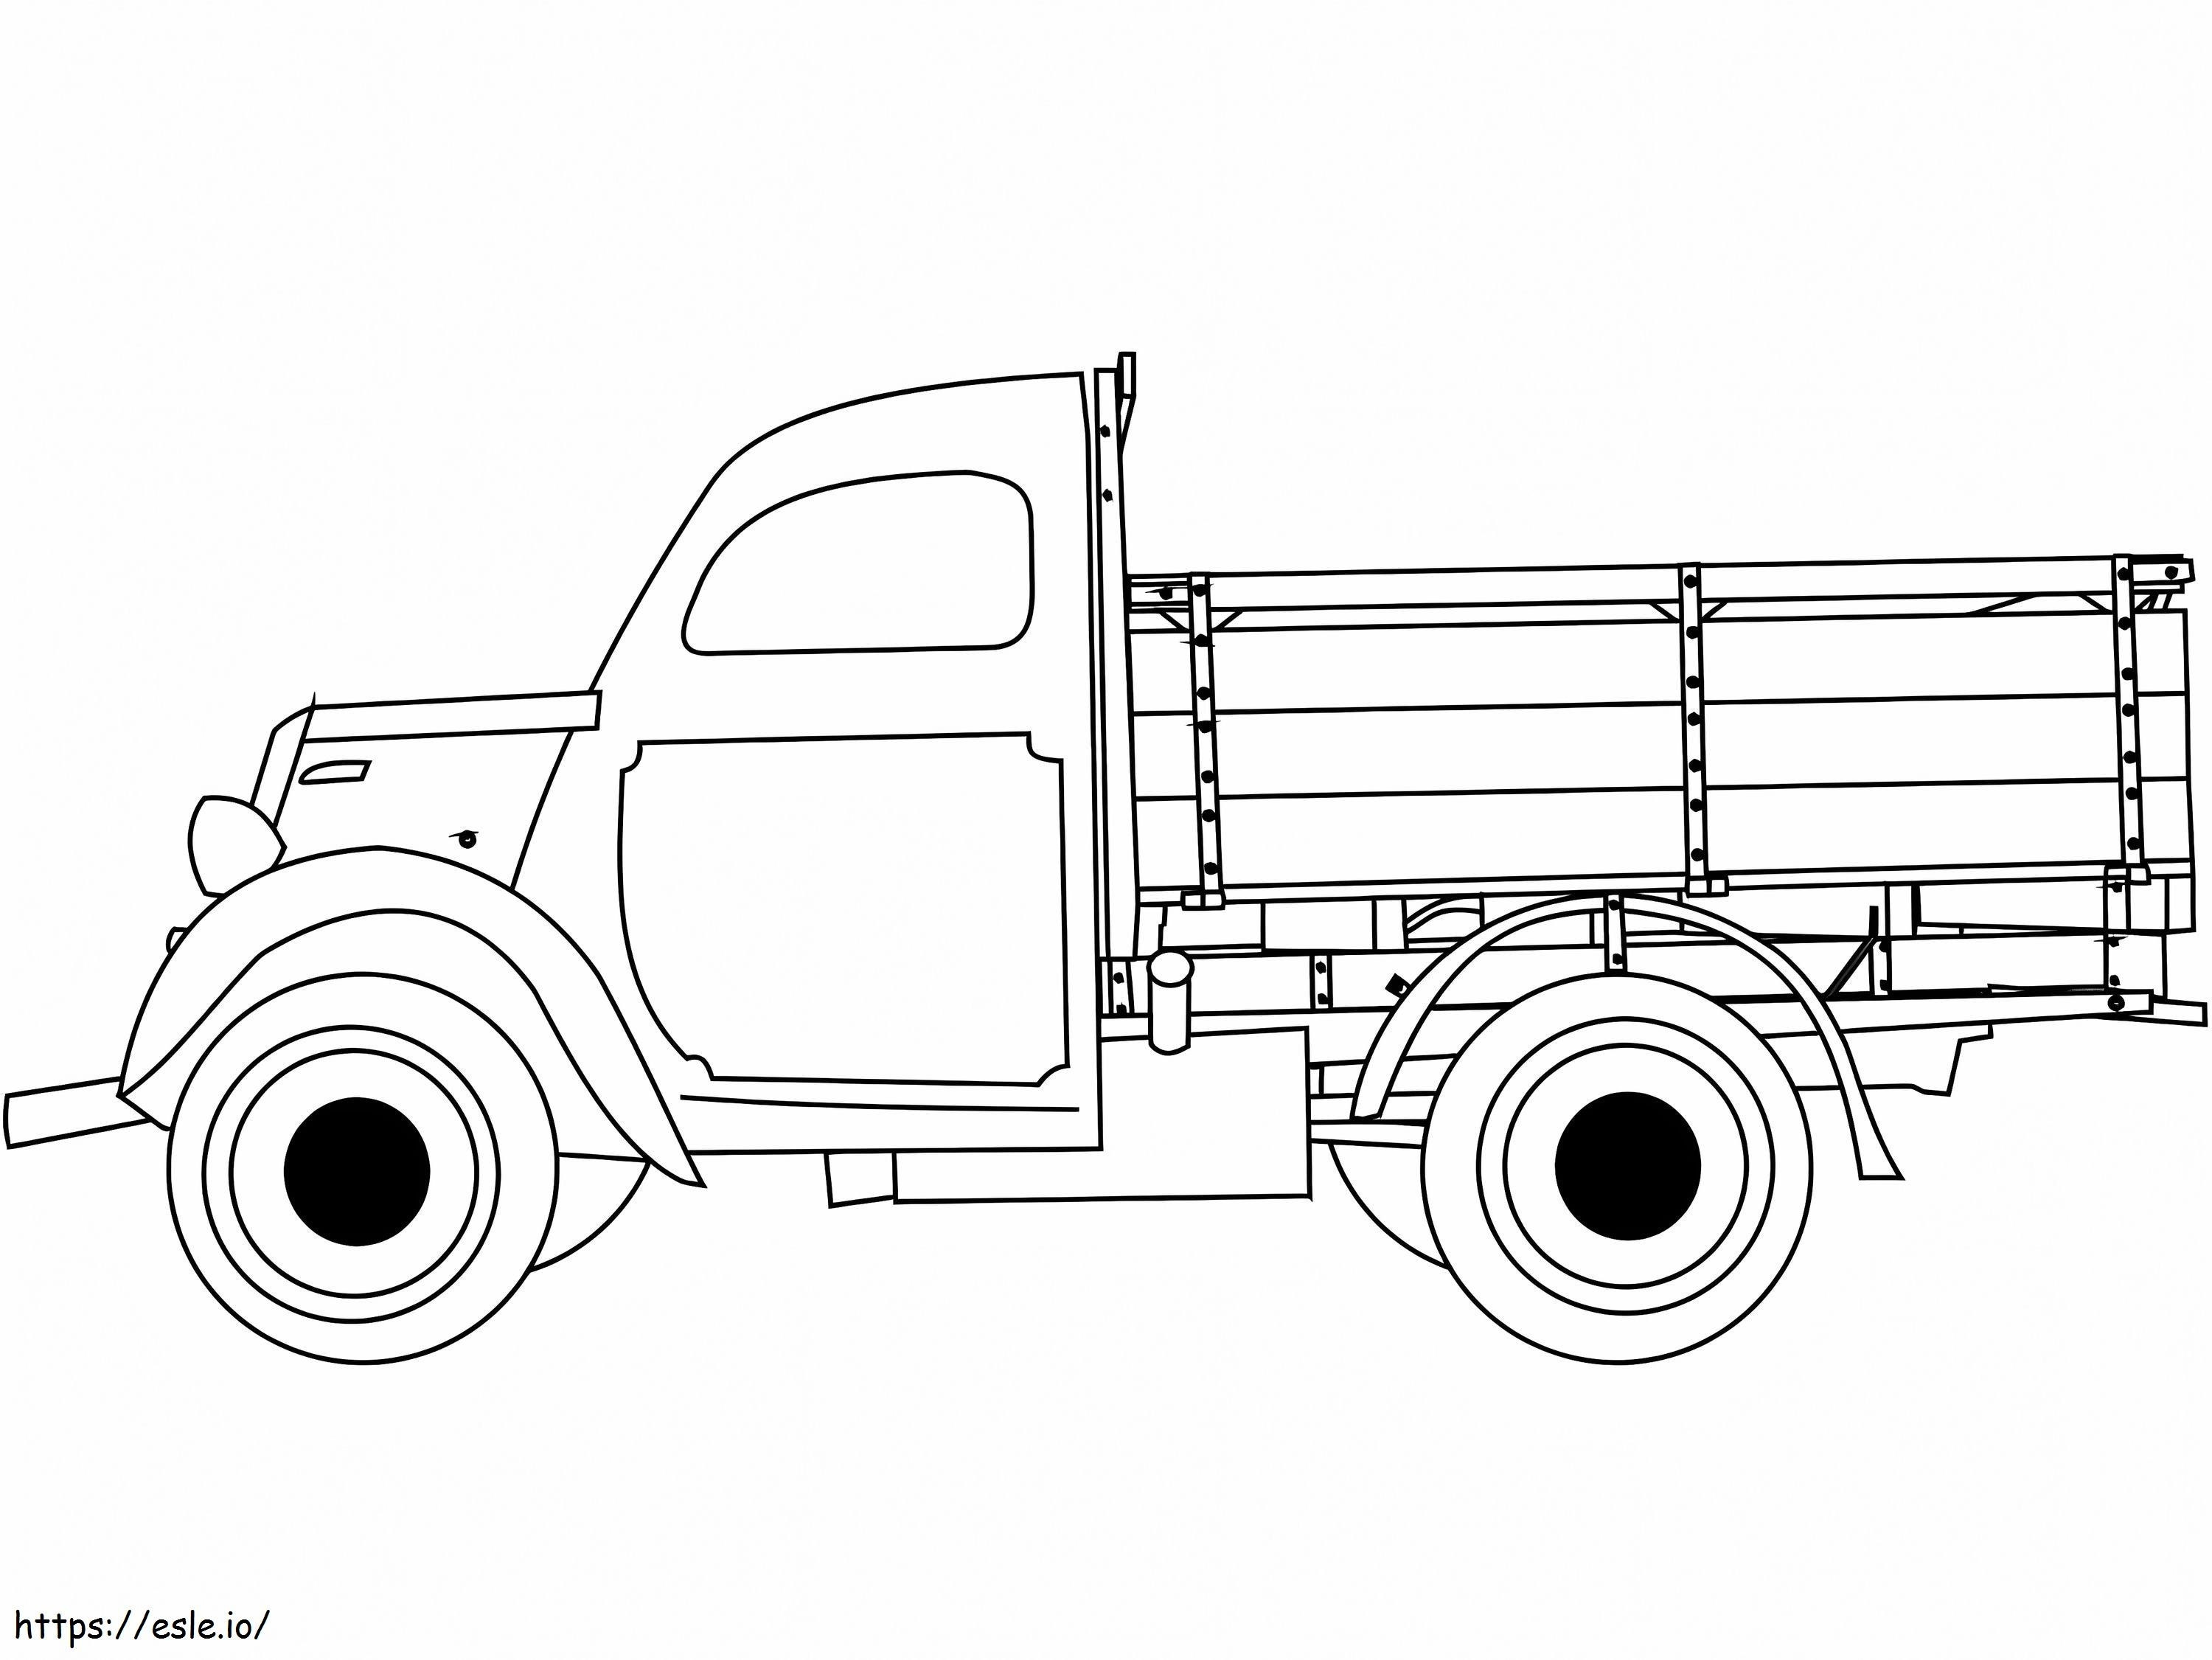 Classic Truck coloring page